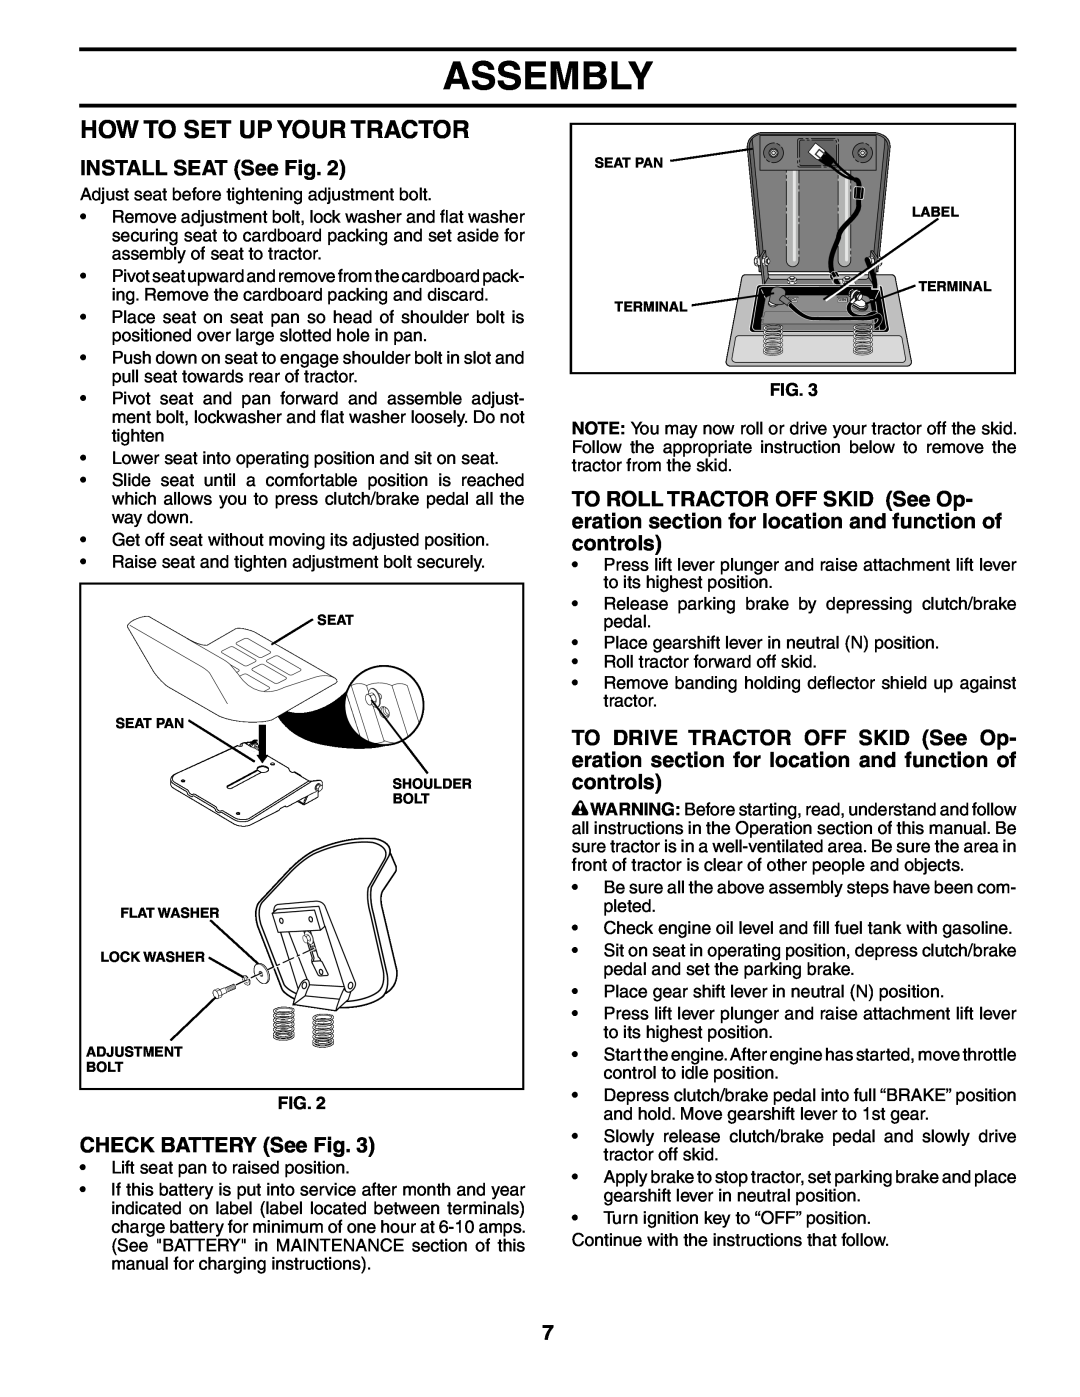 Poulan PO1842STA manual How To Set Up Your Tractor, INSTALL SEAT See Fig, CHECK BATTERY See Fig, Assembly 